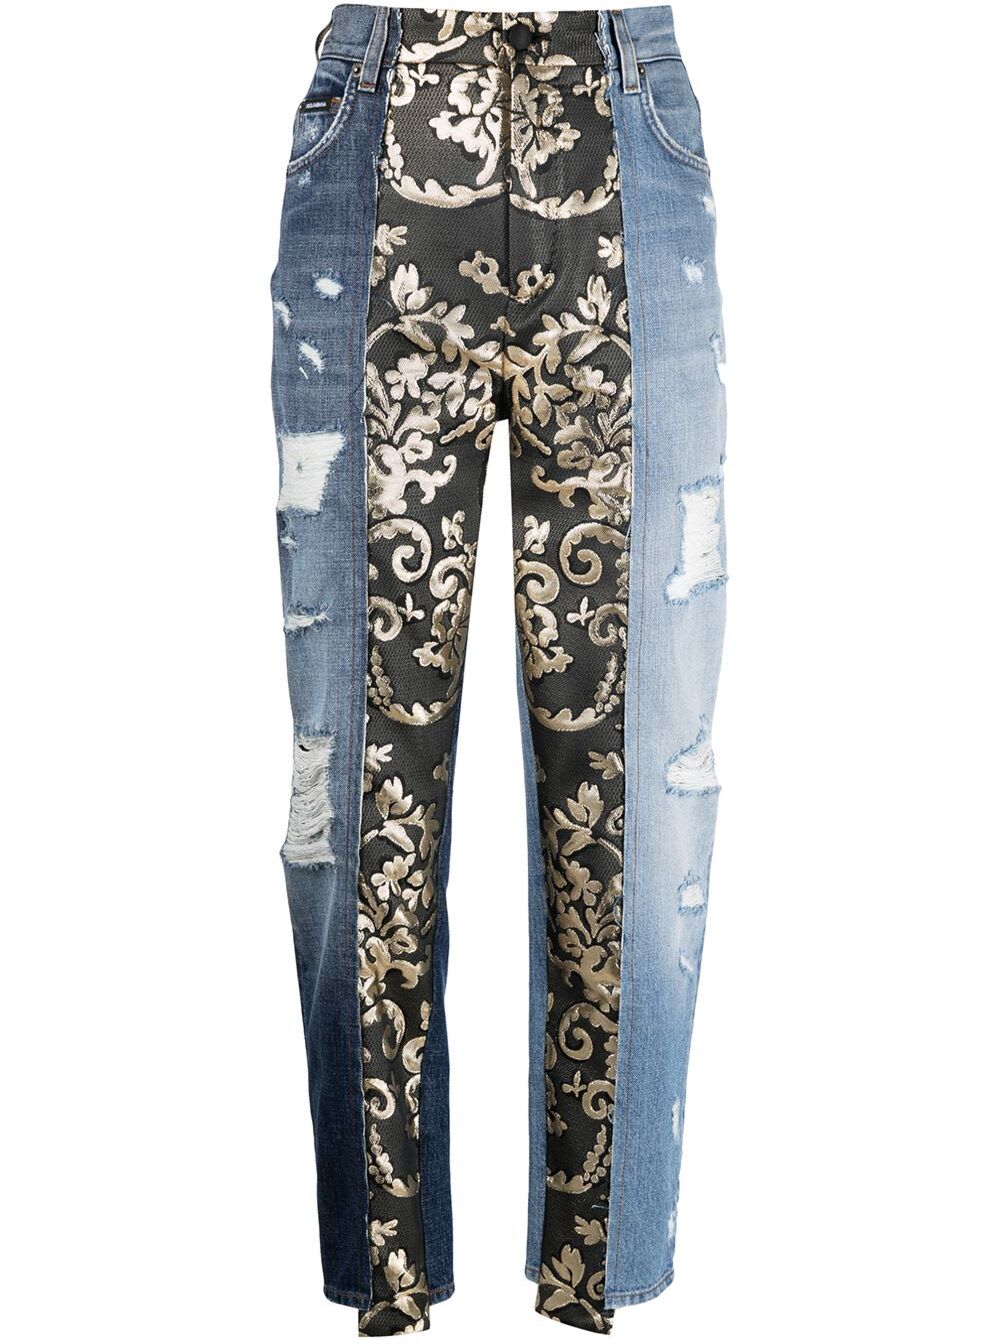 DOLCE & GABBANA RIPPED JEANS WITH CONTRASTING JACQUARD INSERTS,FTB2NDG900LS9000